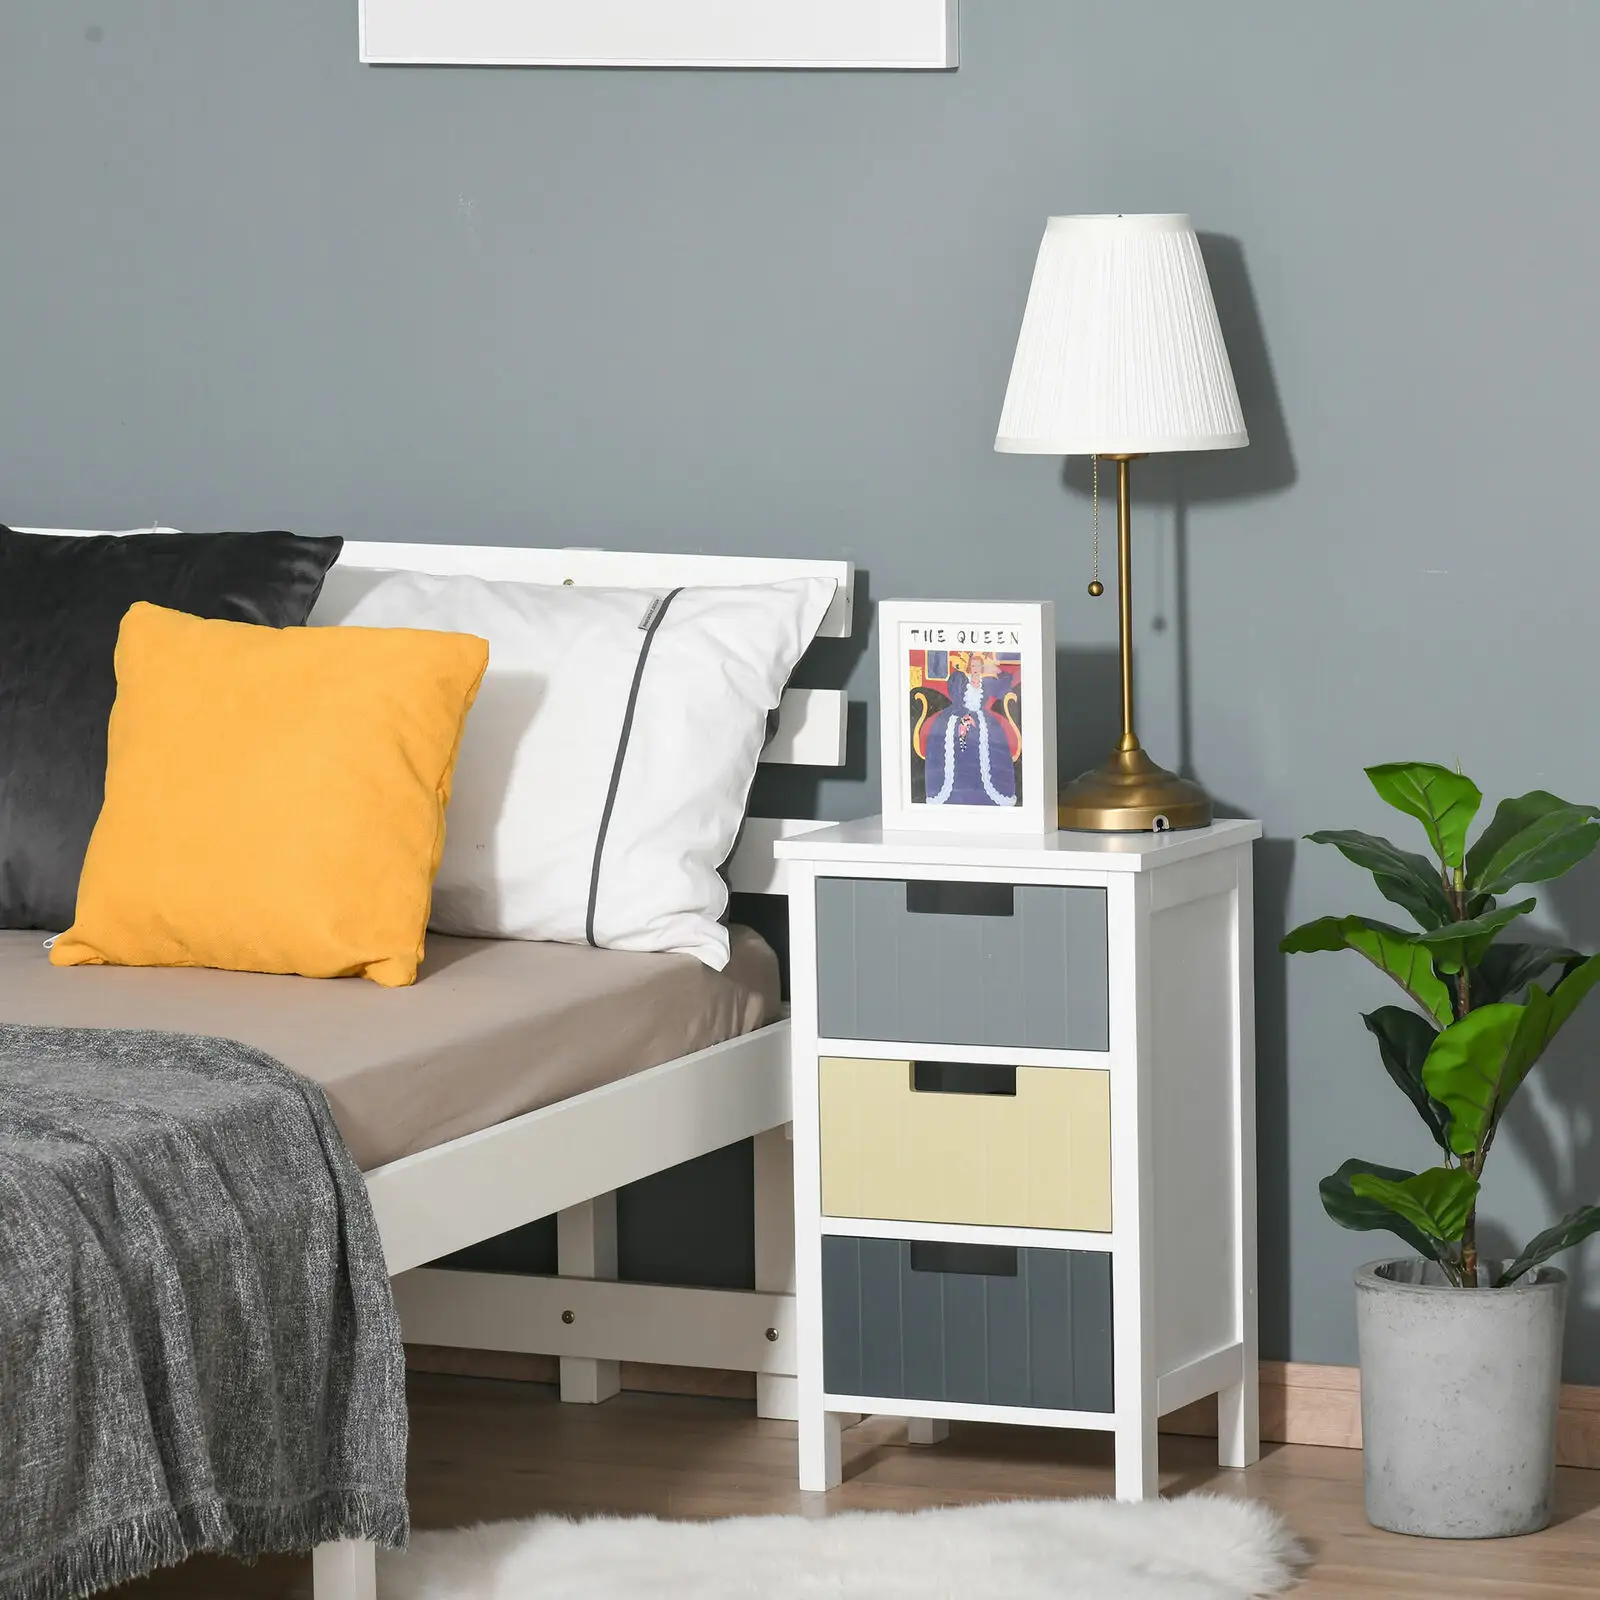 Wholesale Price Home Furniture Bedroom Mirrored Cabinet Nightstand Bed Side Table